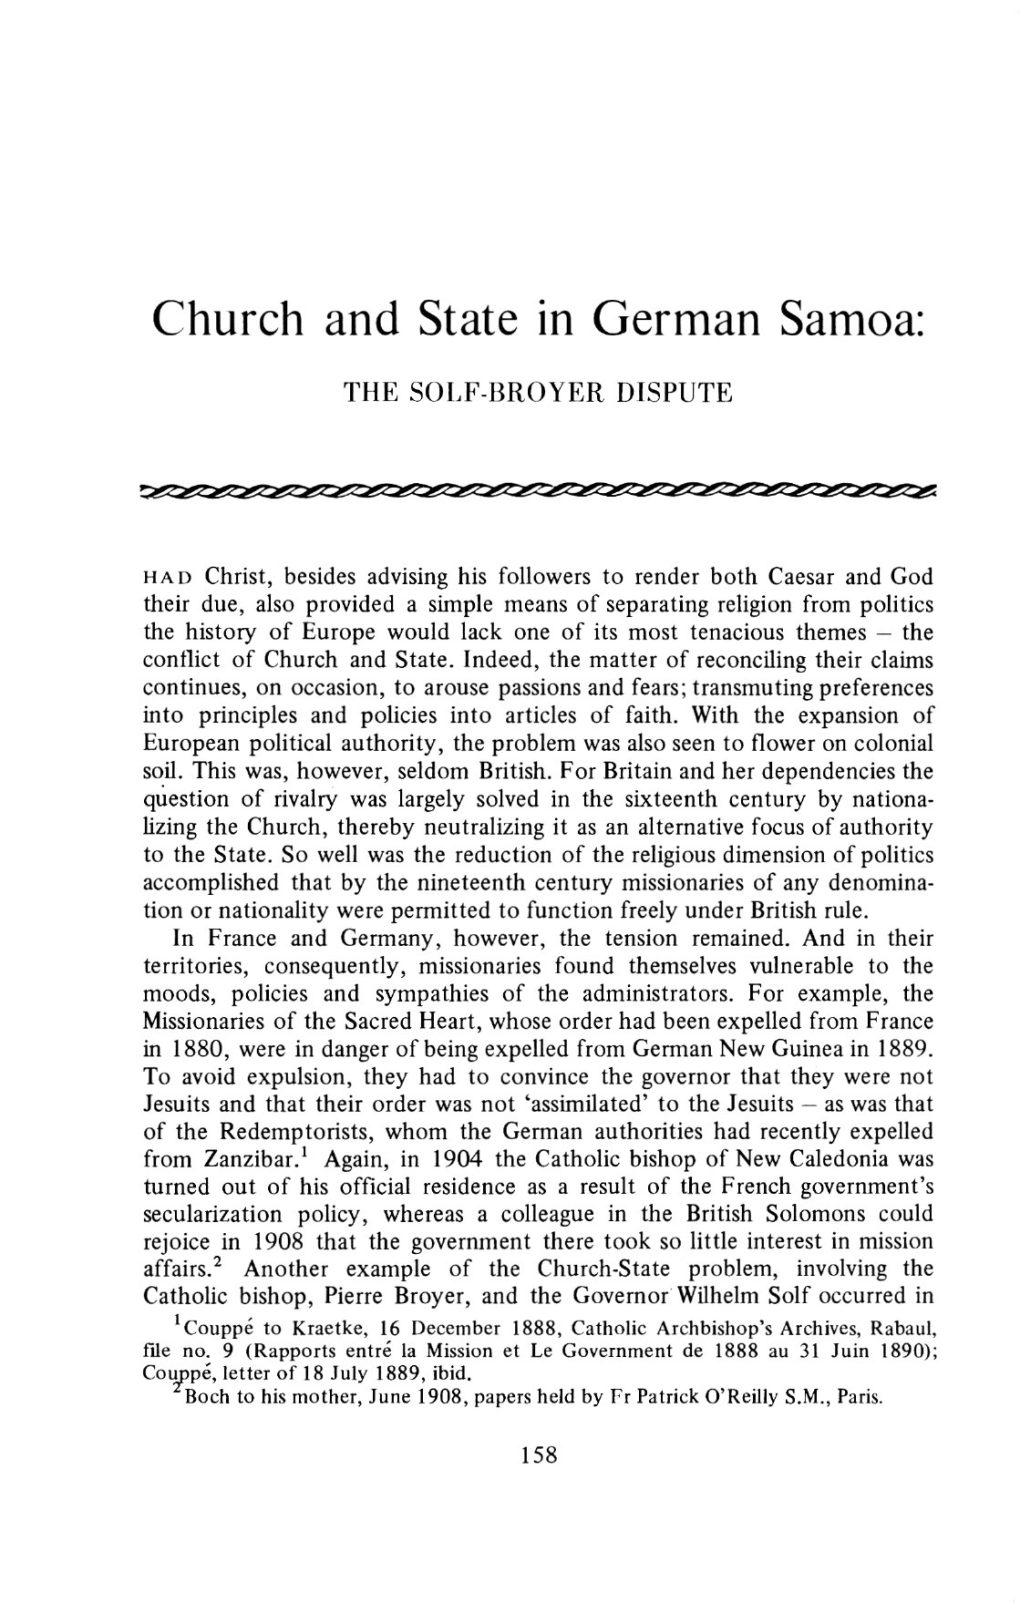 Church and State in German Samoa: the SOLF-BROYER DISPUTE